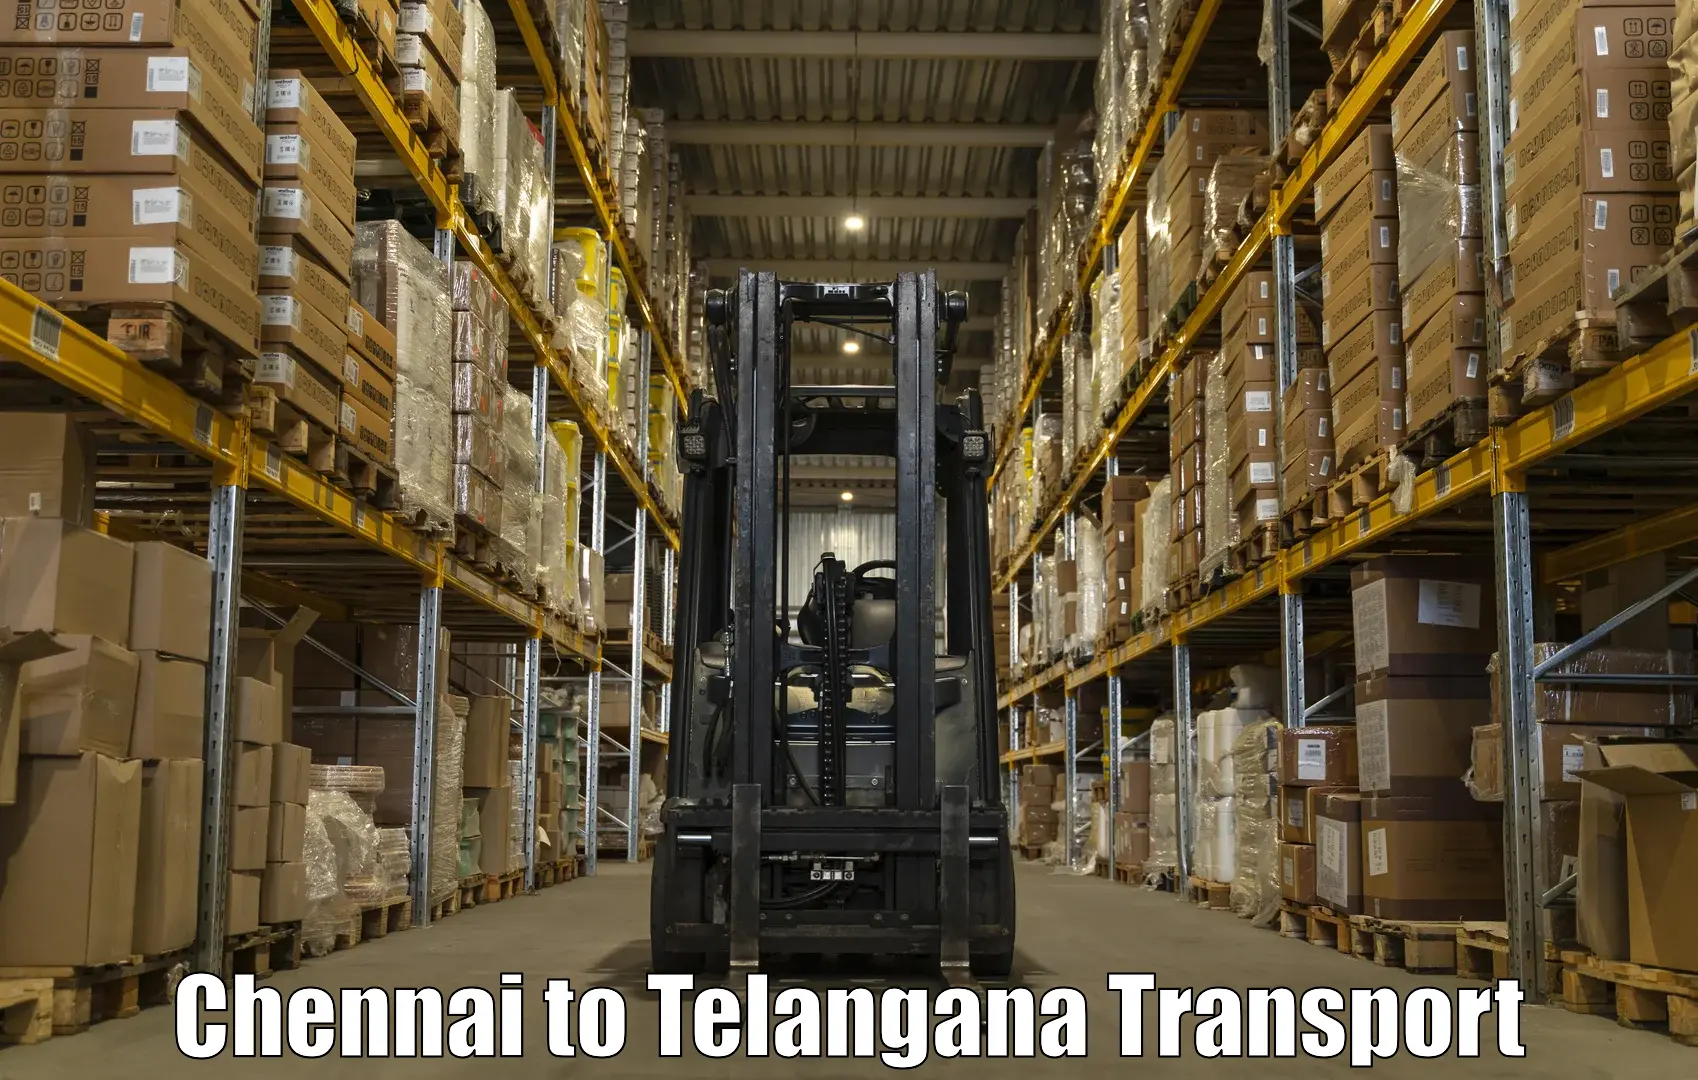 Express transport services in Chennai to Vemulawada